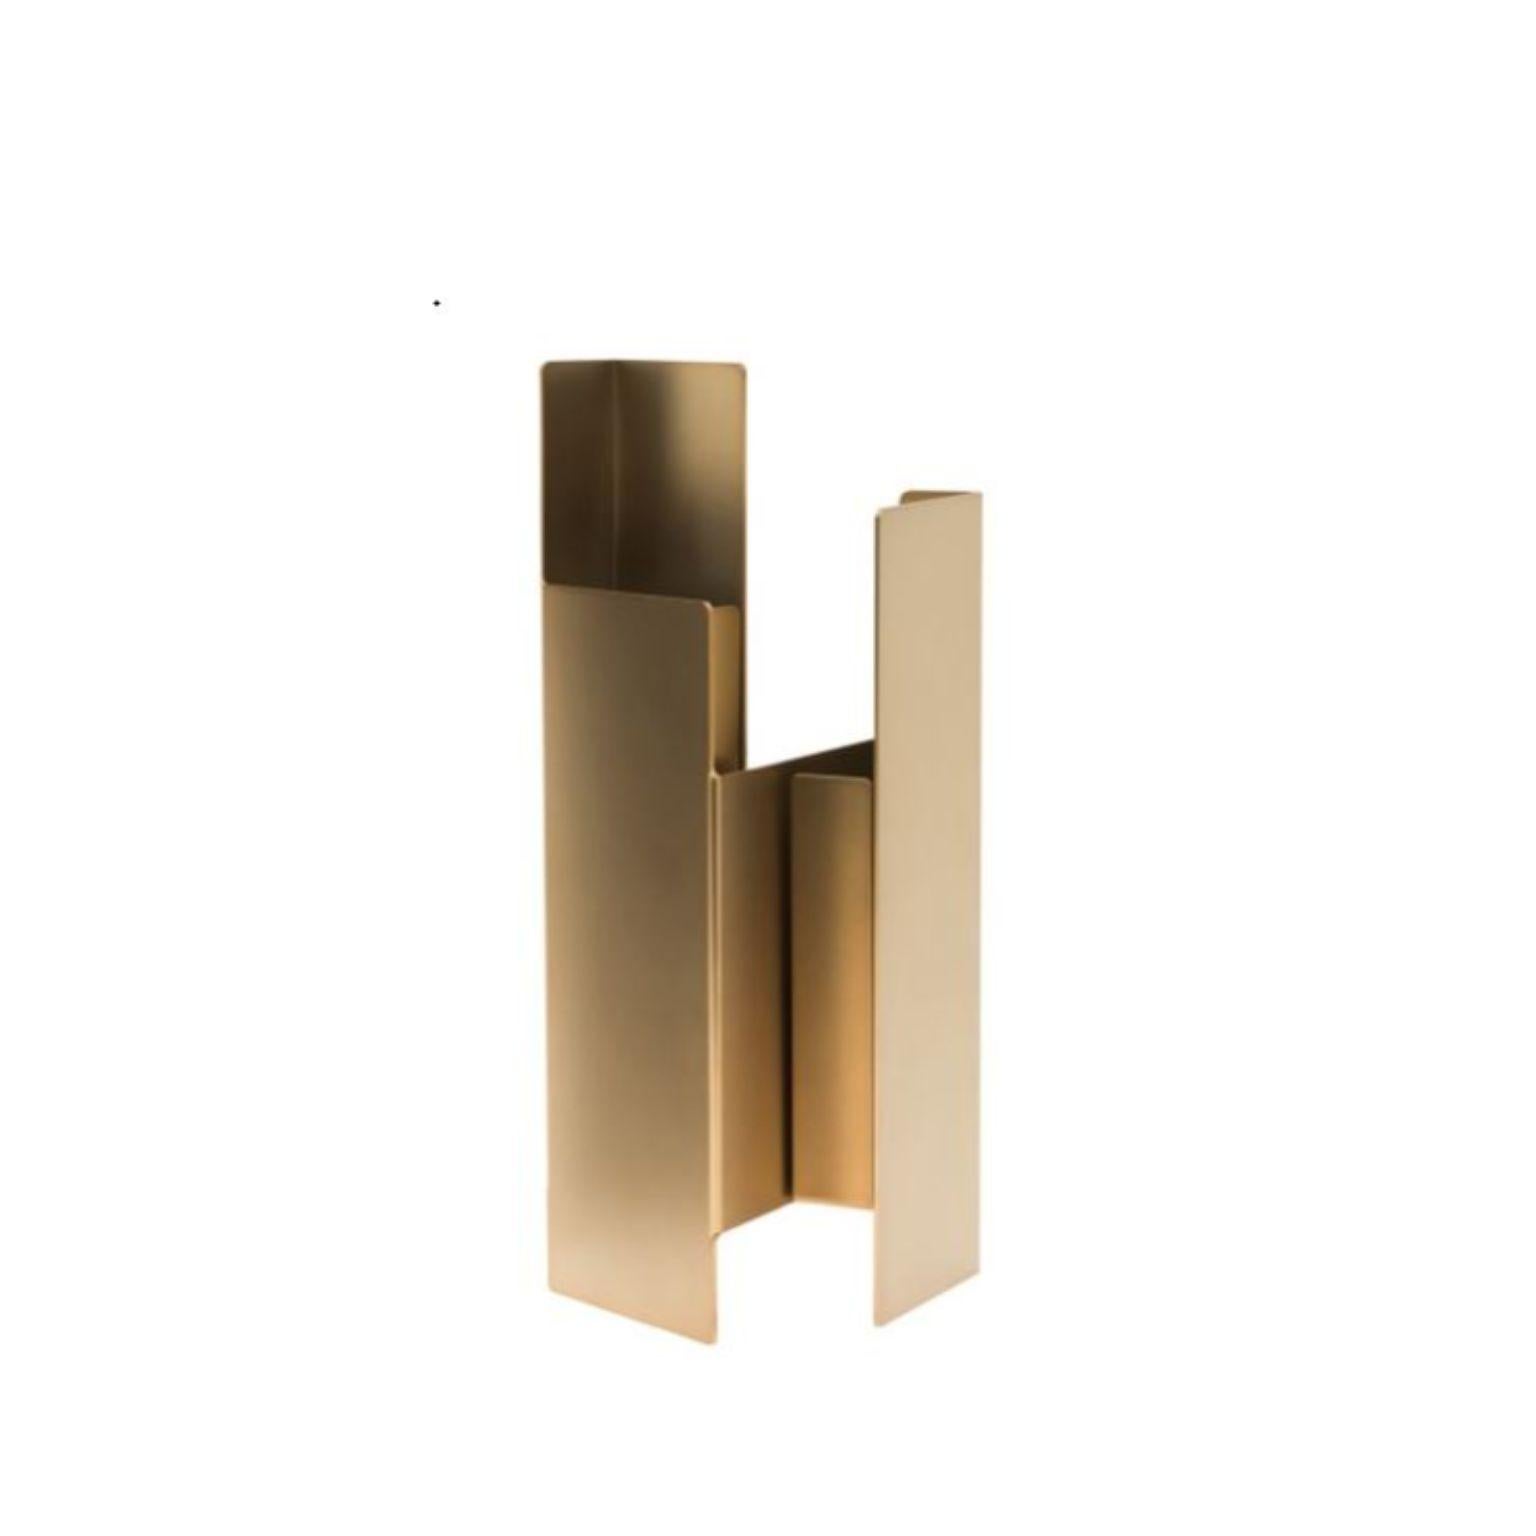 Set of 2 Matte bronze Fugit vases by Mason Editions
Design: Matteo Fiorini
Dimensions: 12 × 15 × 34 cm
Materials: Iron, Pirex glass

Fugit vase consists of a metal sheet that seems to turn and close around itself, generating an alternation of